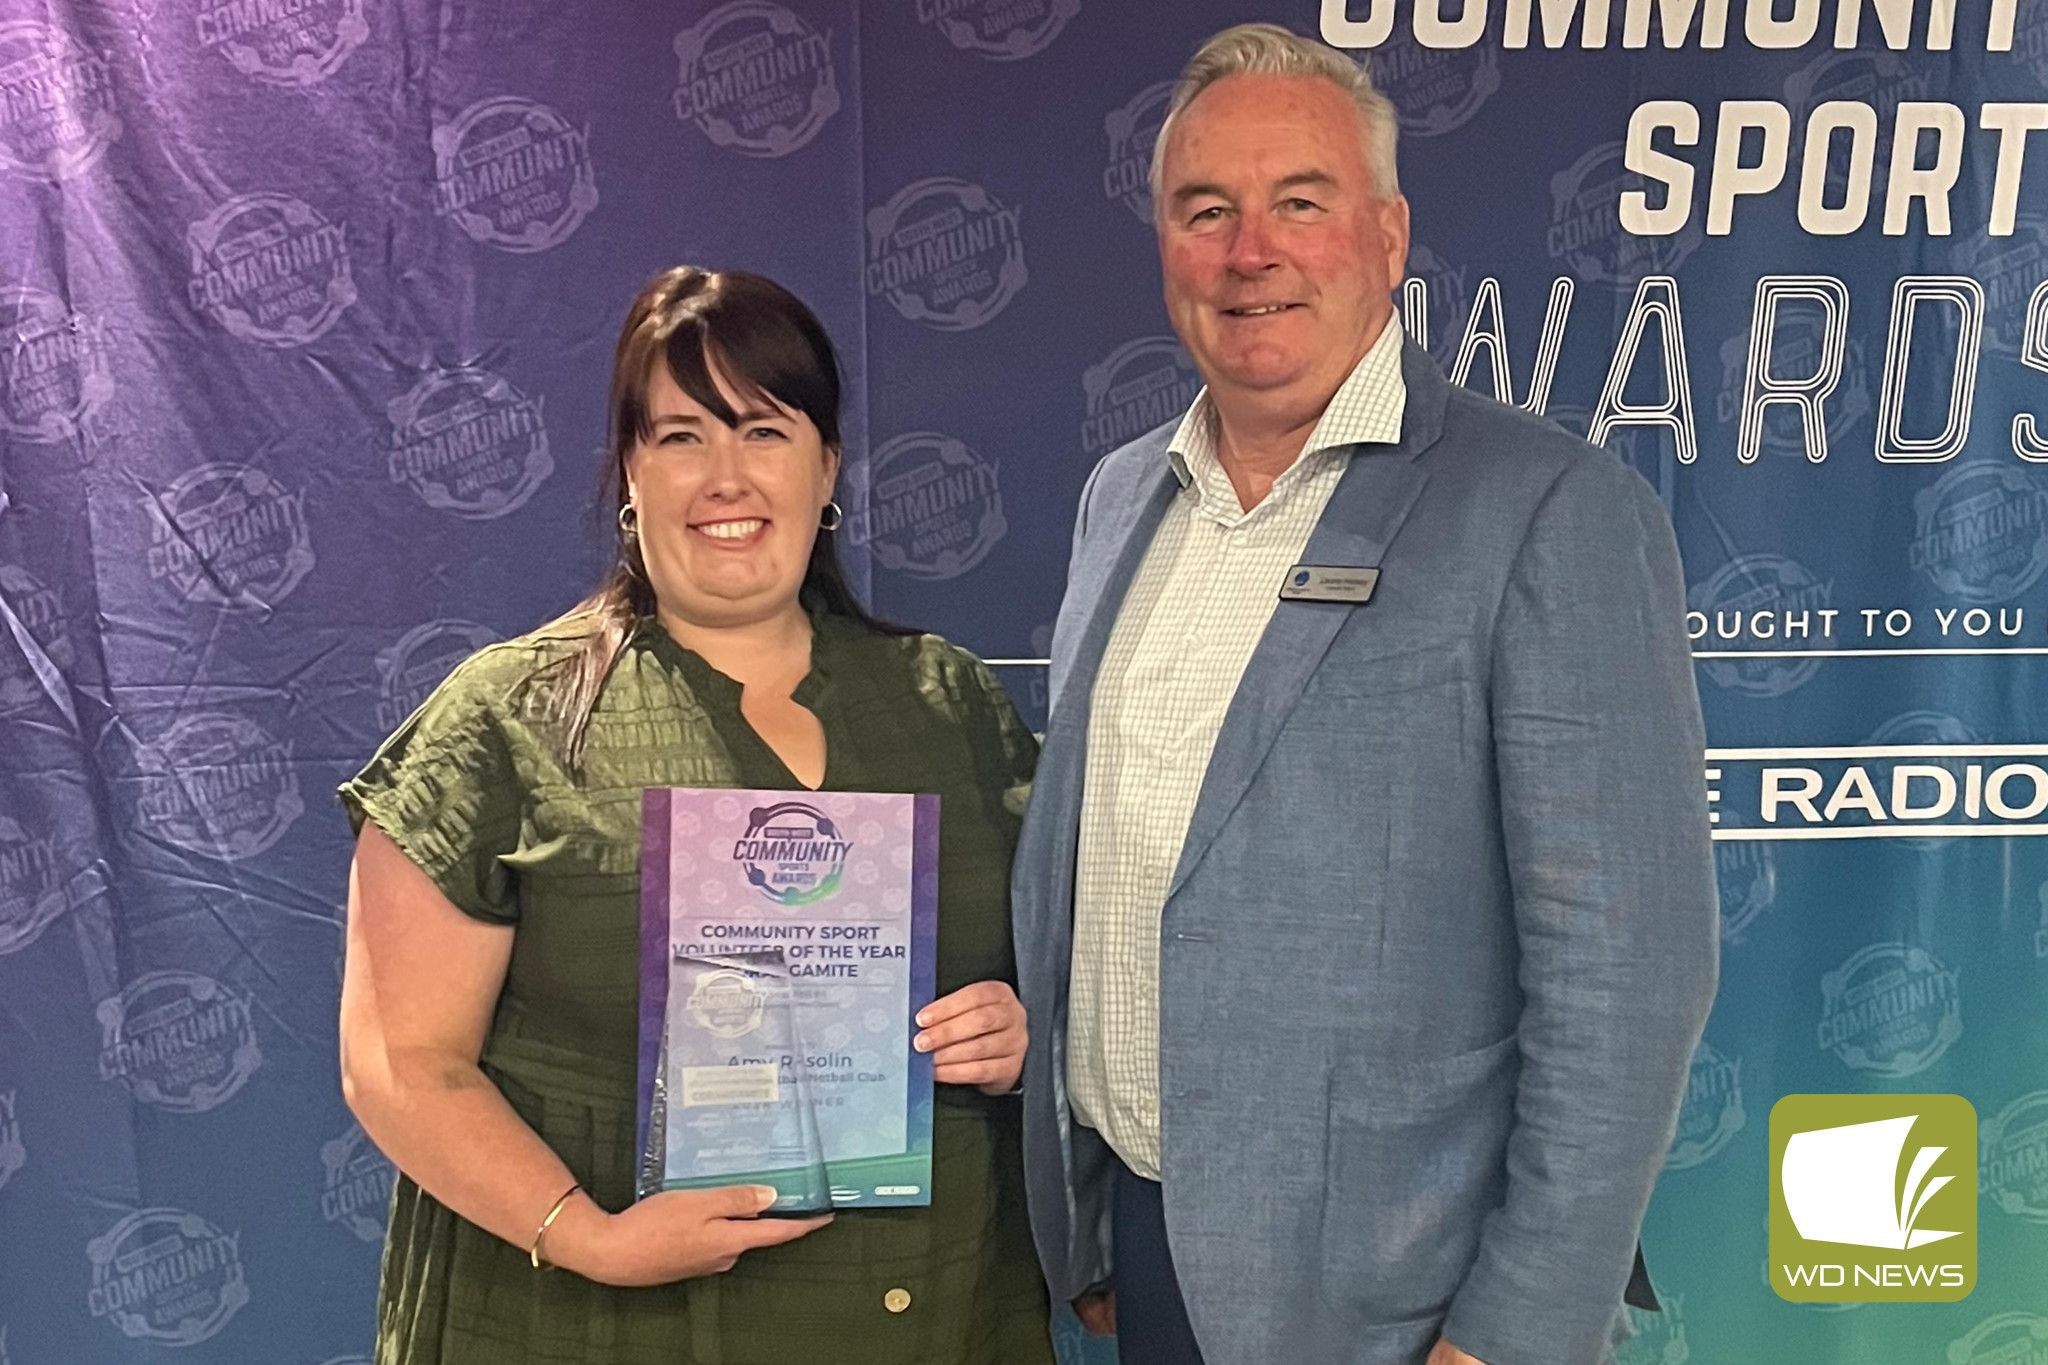 Amy Rosolin from the Timboon Demons, pictured with Corangamite Shire councillor Laurie Hickey, received the Corangamite Community Sport Volunteer of the Year Award.